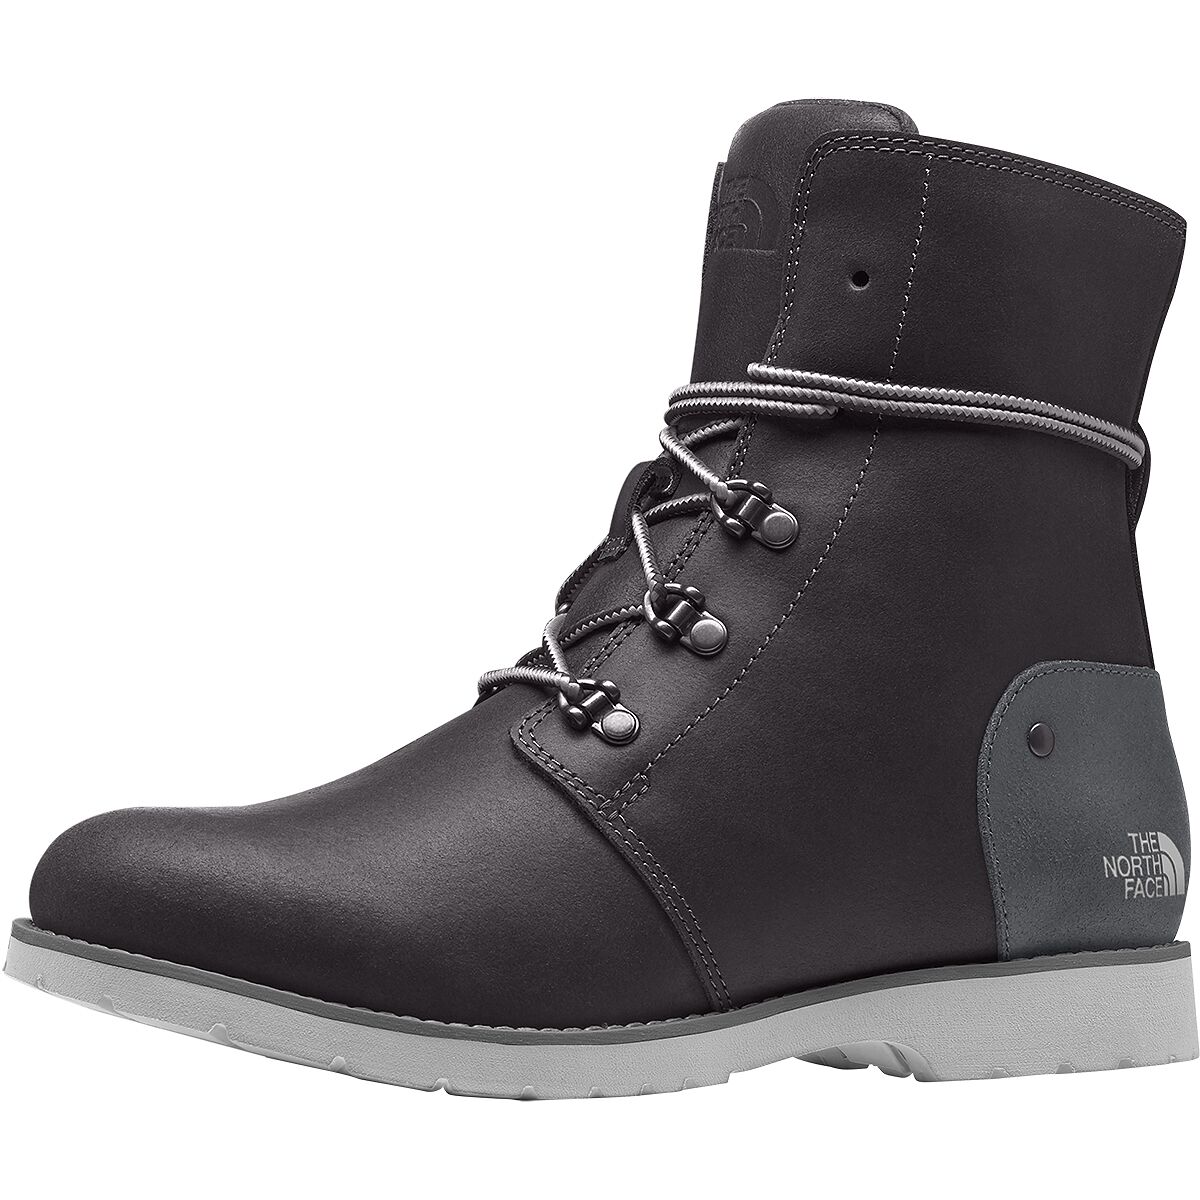 The North Lace II Boot - Women's -